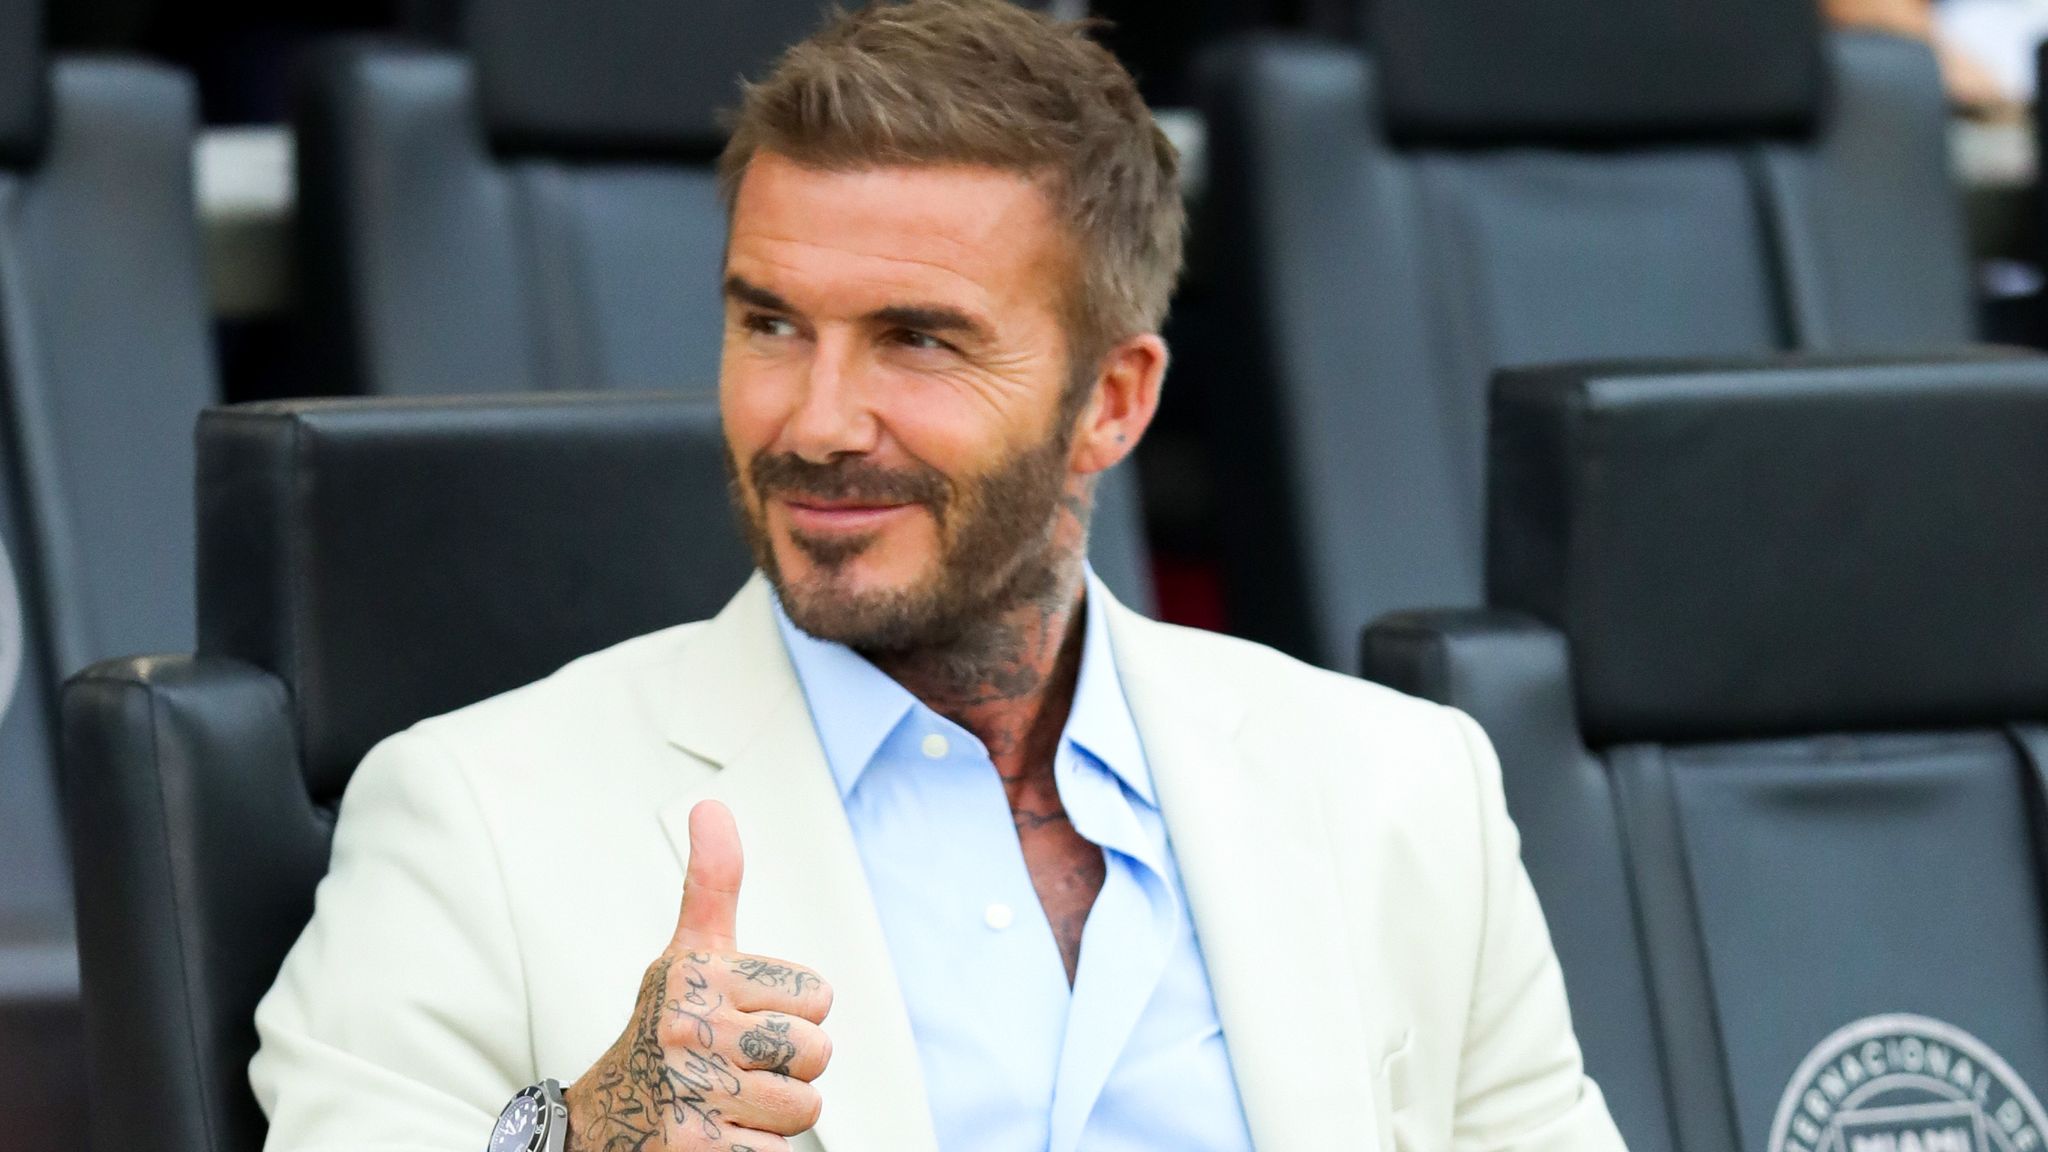 David Beckham Needs To Stop! The King Of Smart Casual Does It